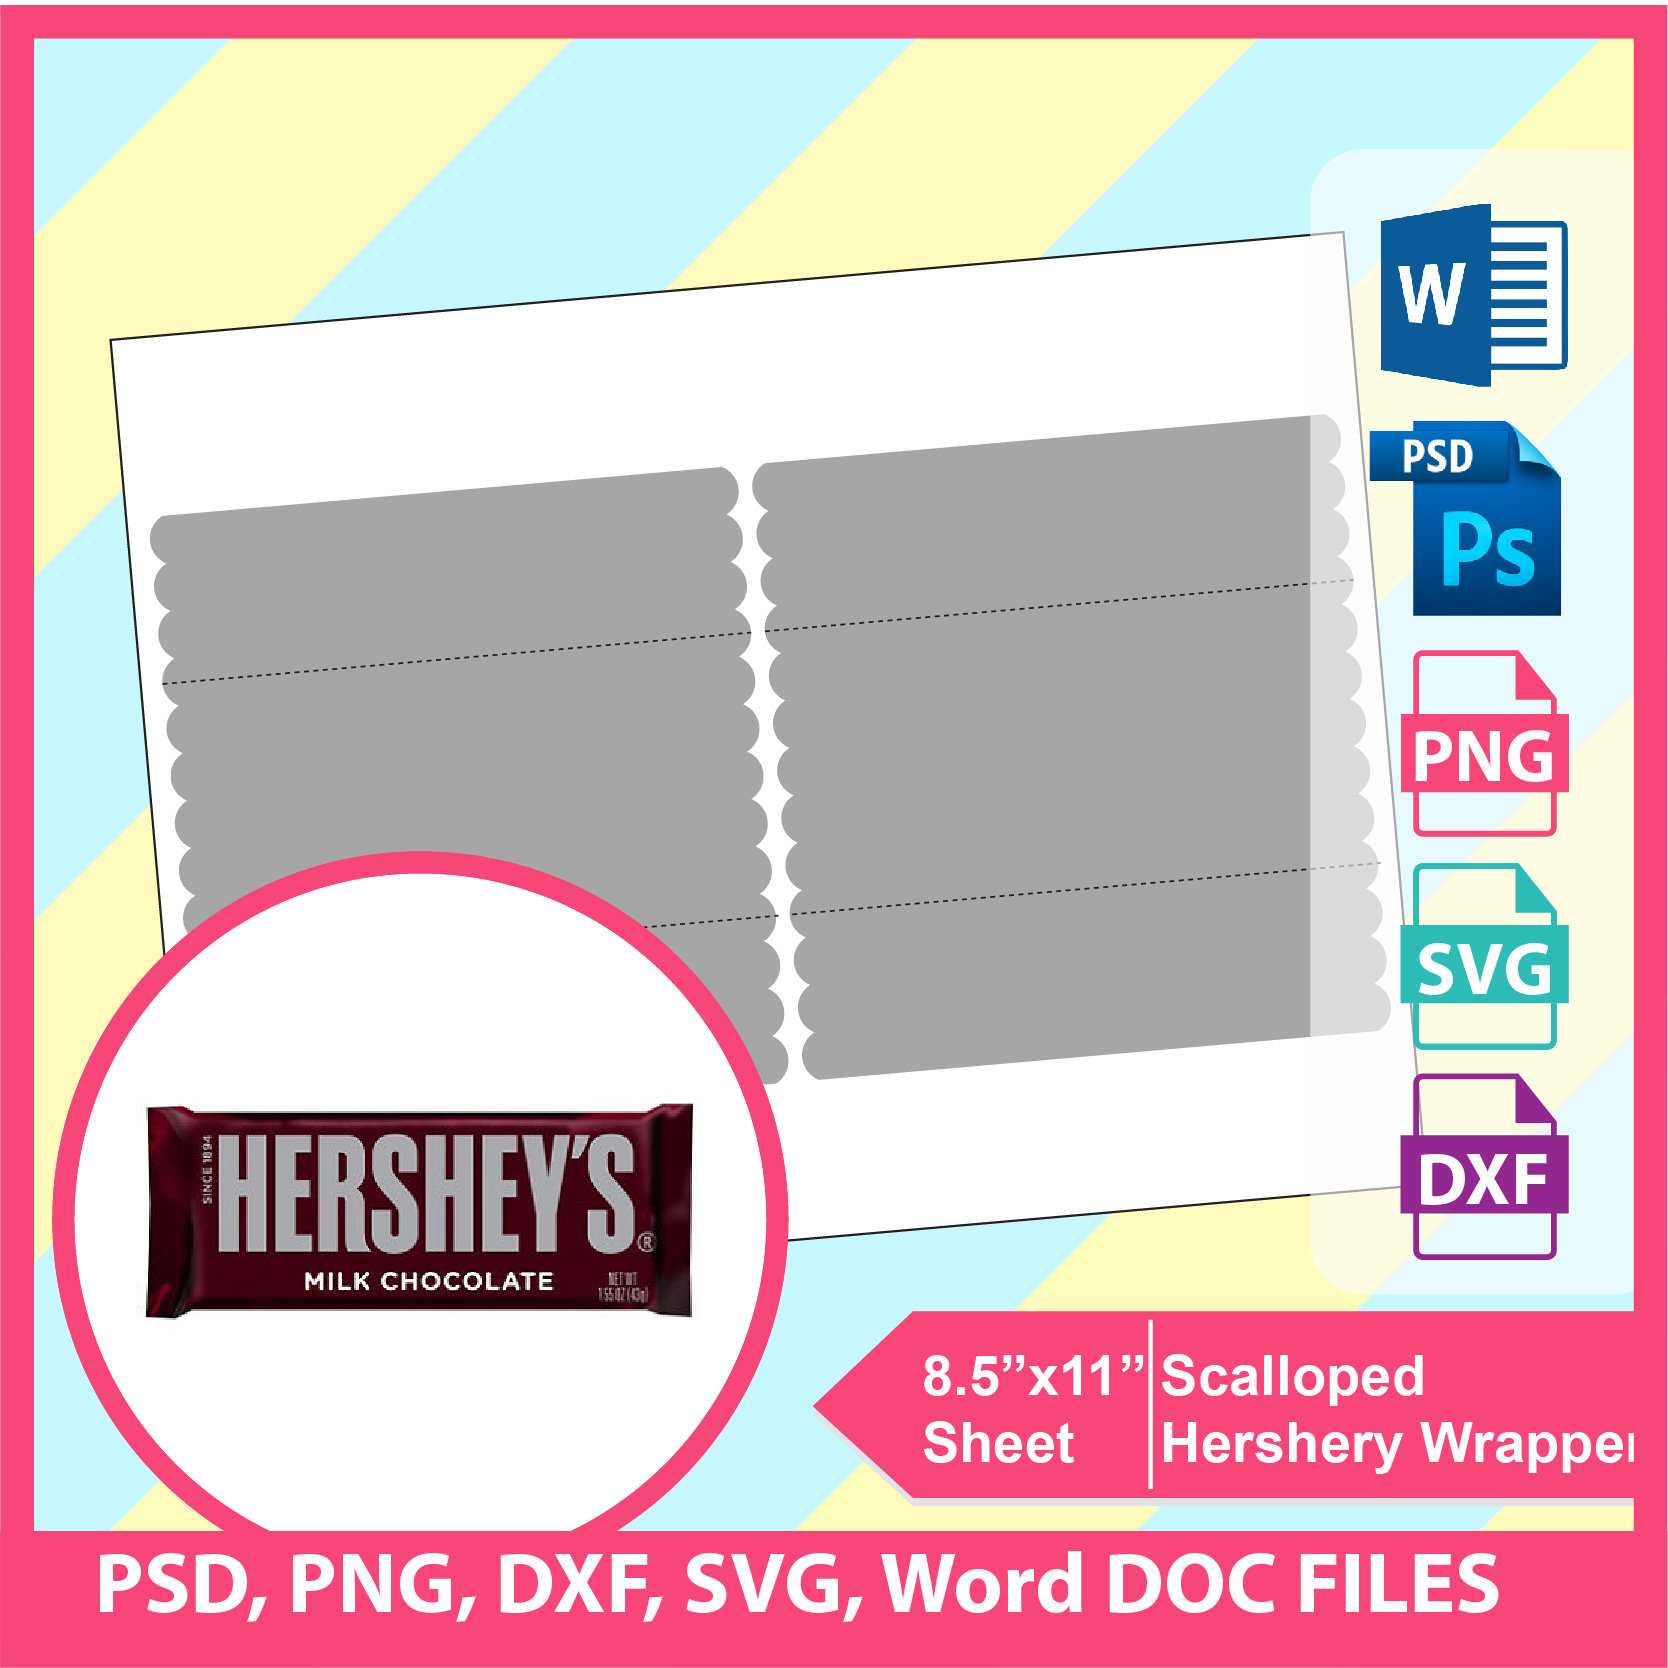 Scalloped Hershey Candy Bar Wrapper Template, Psd, Png And Svg, Dxf, Doc  Microsoft Word Formats, 8.5X11" Sheet, Printable 672 With Candy Bar Wrapper Template Microsoft Word